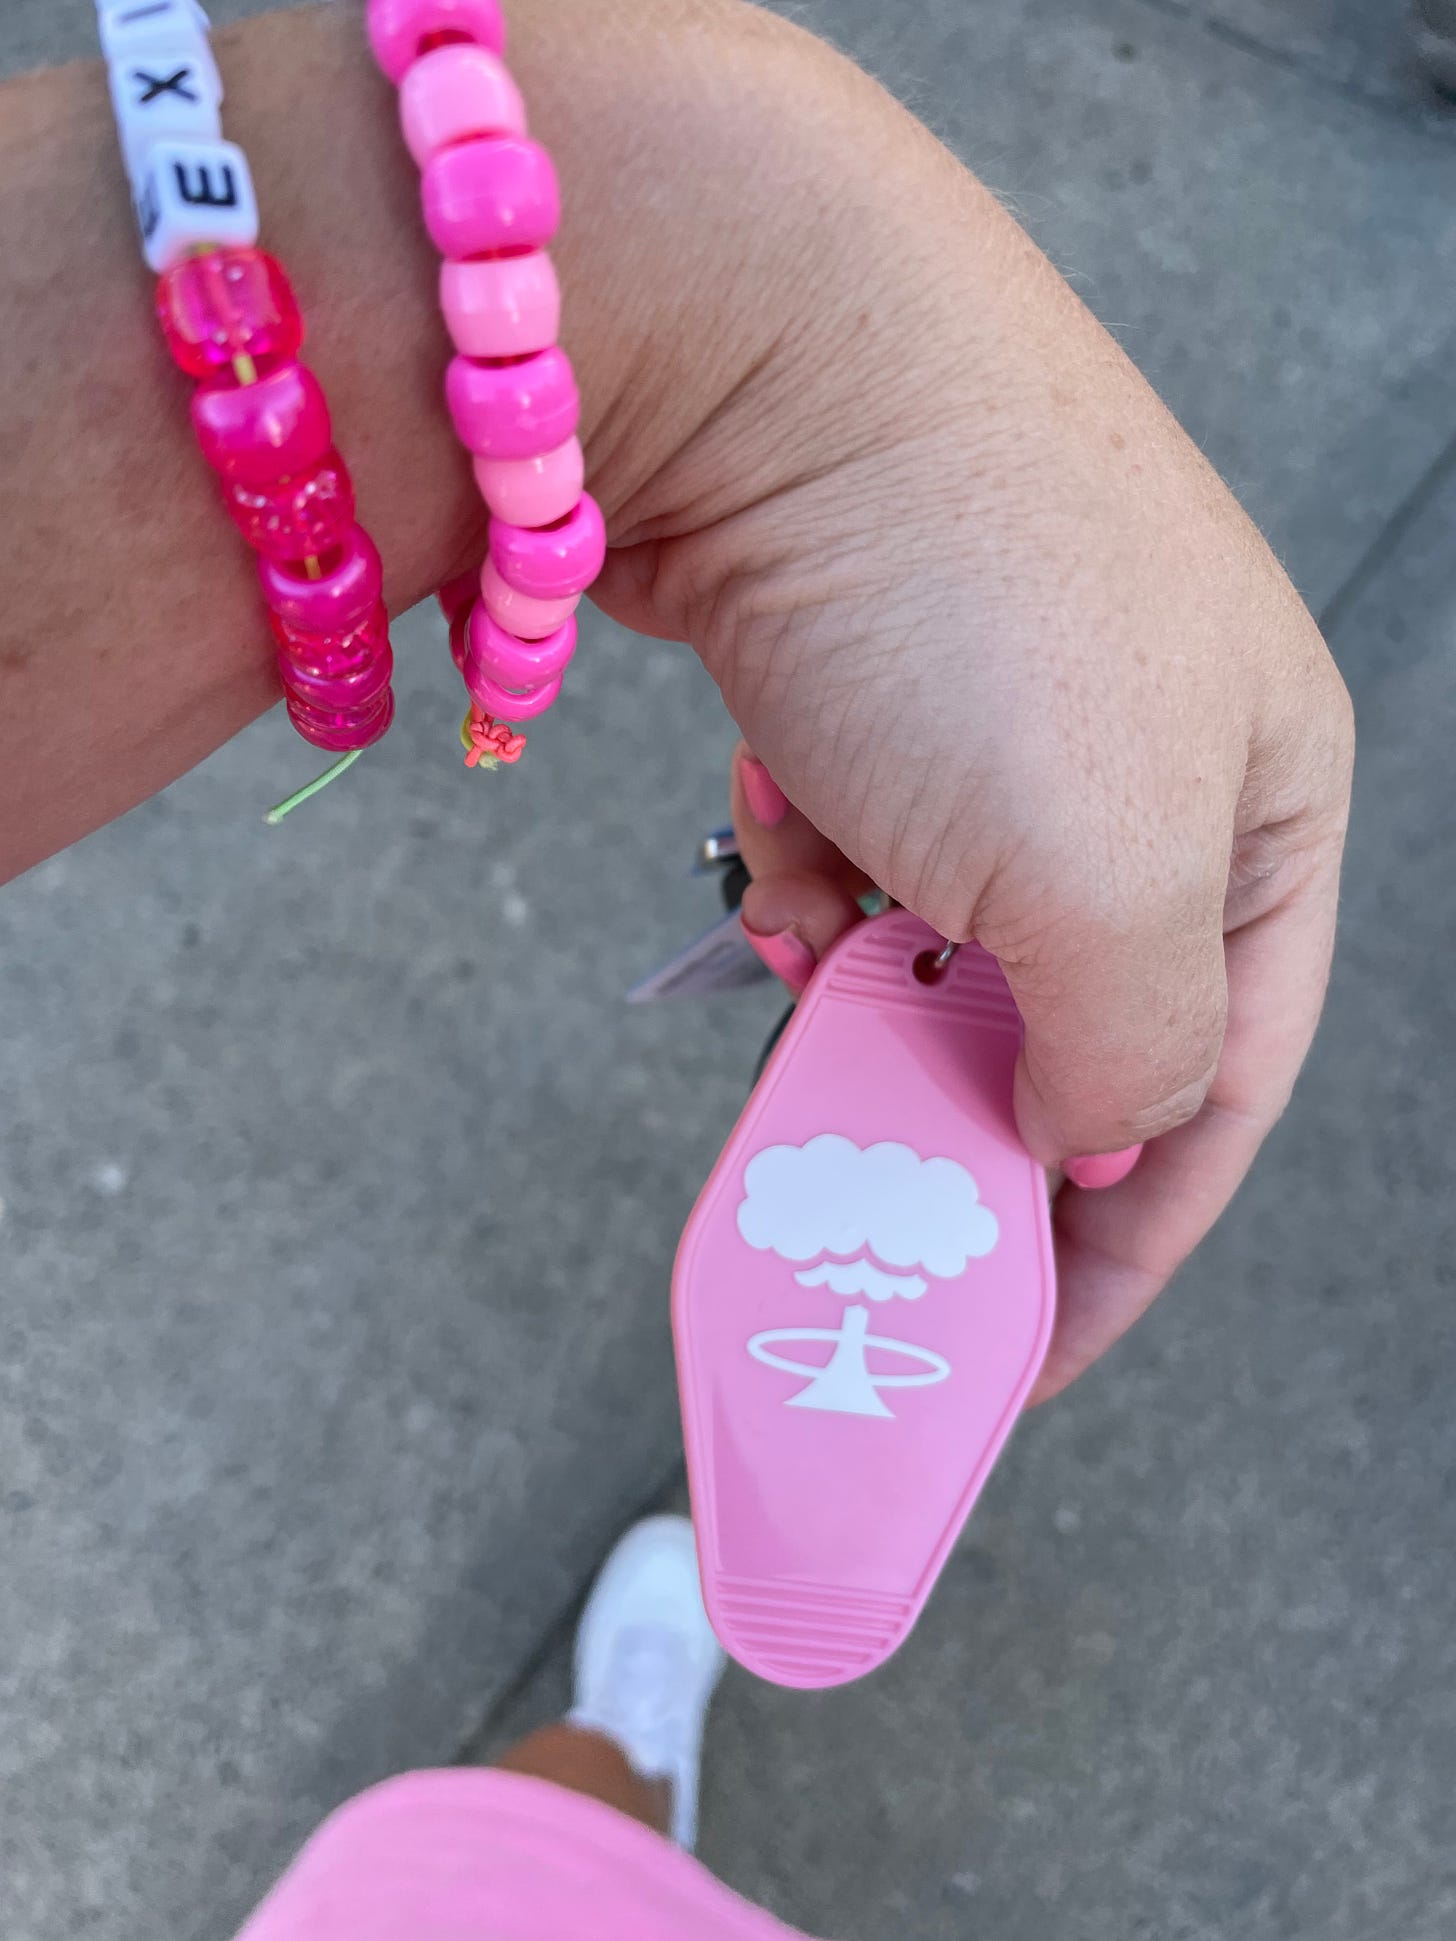 a white hand with pink beaded bracelets on it is holding a pink plastic motel like keychain with a white mushroom cloud on it